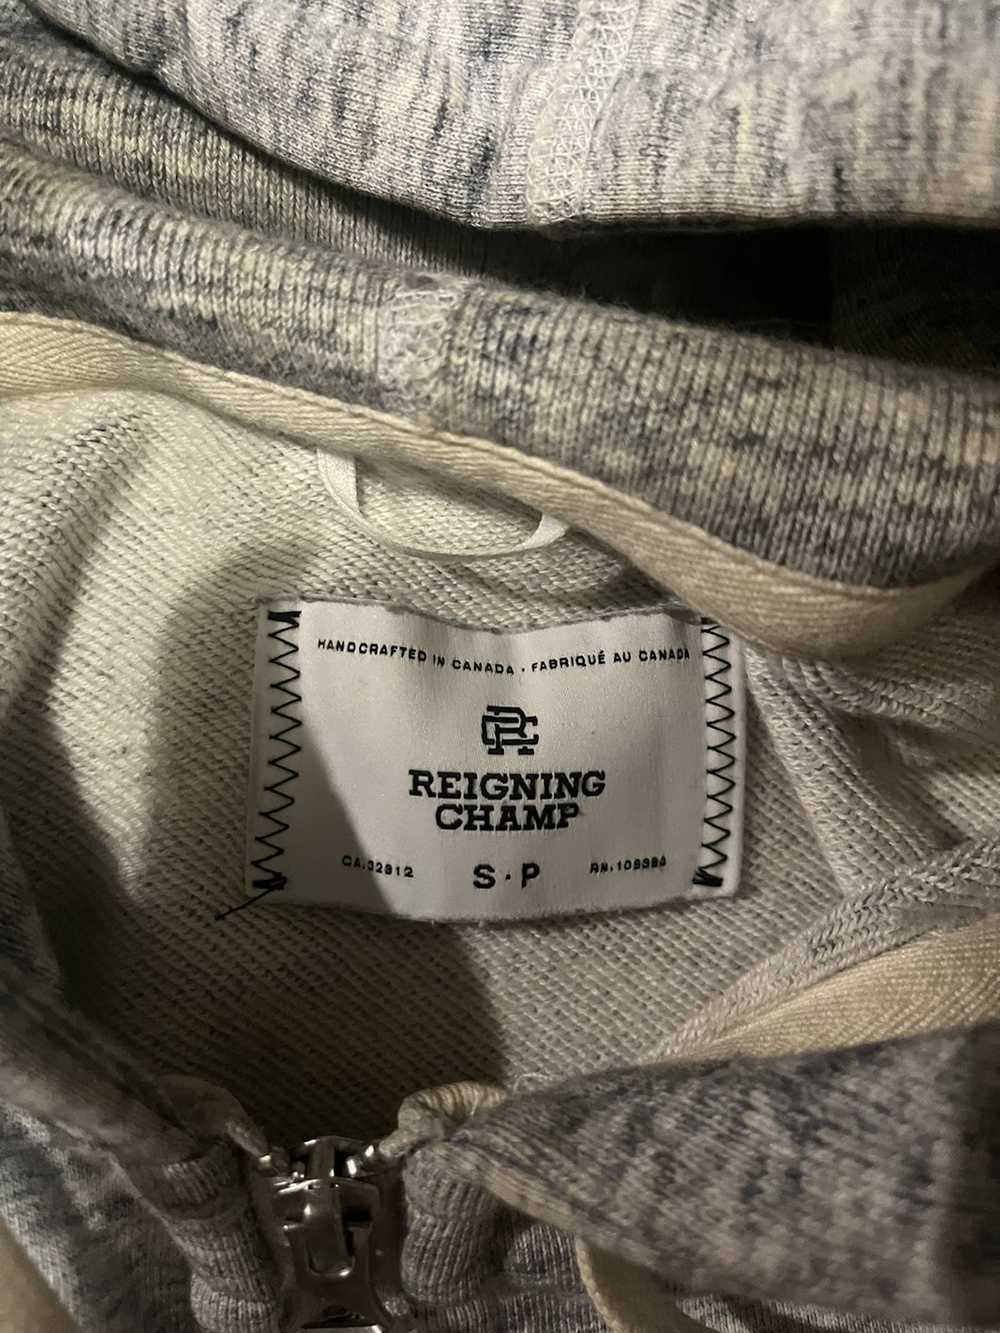 Reigning Champ Reigning champ zip hoodie - image 2